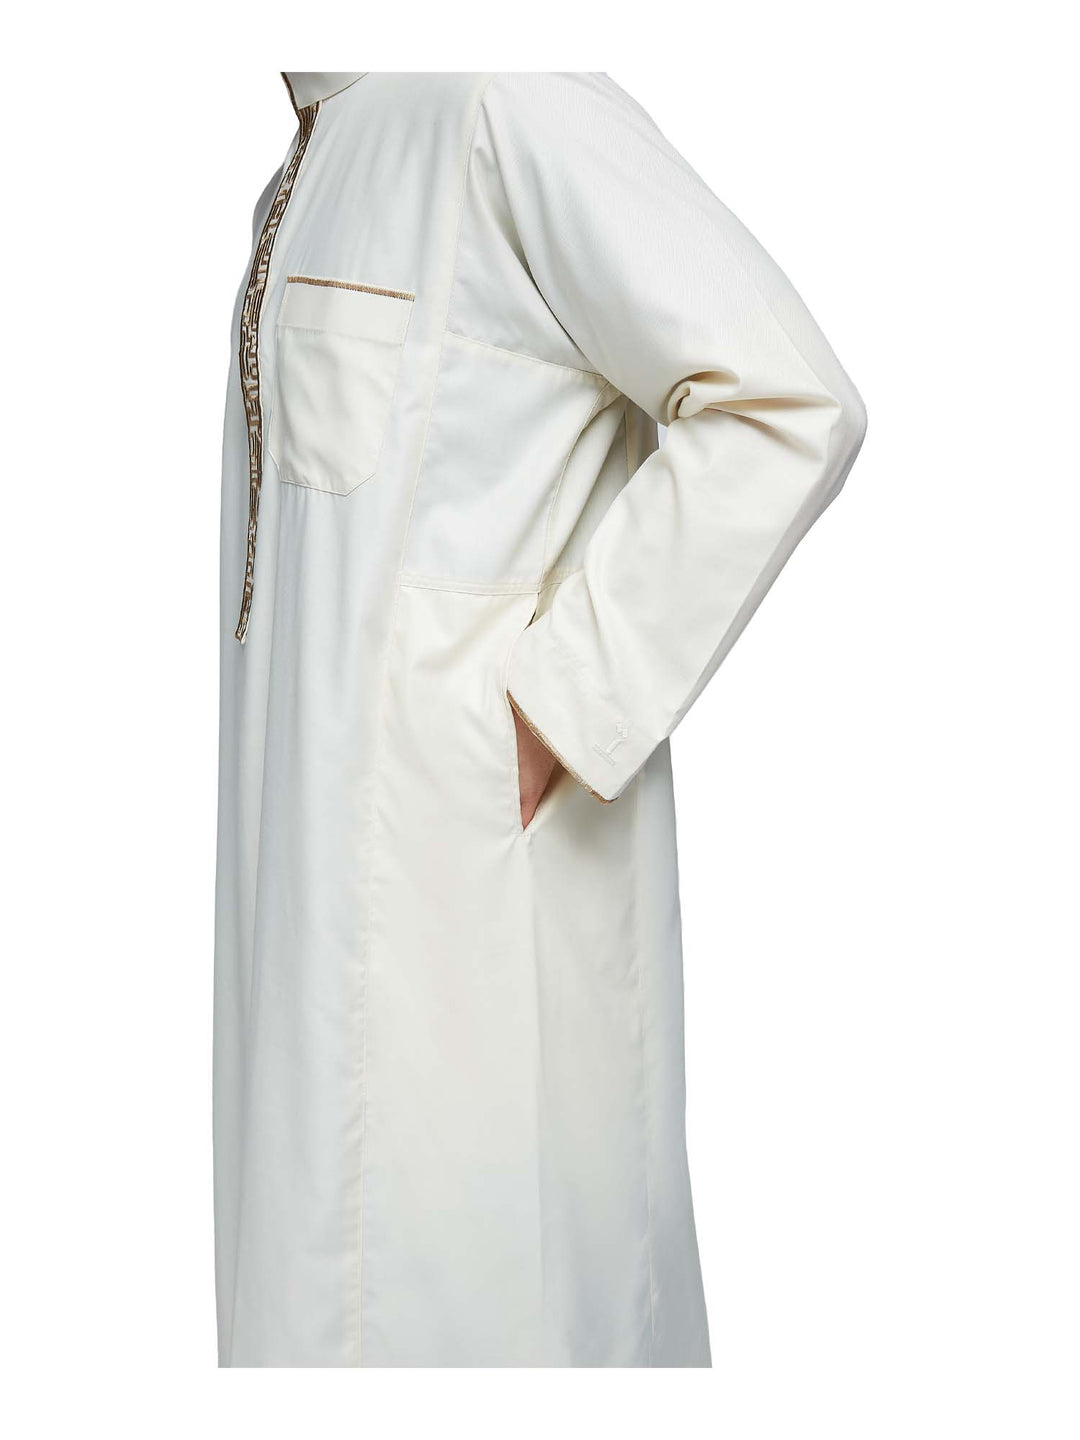 Islamic Impressions Men's Embroidered Thobe with Collar - Sultan Collection